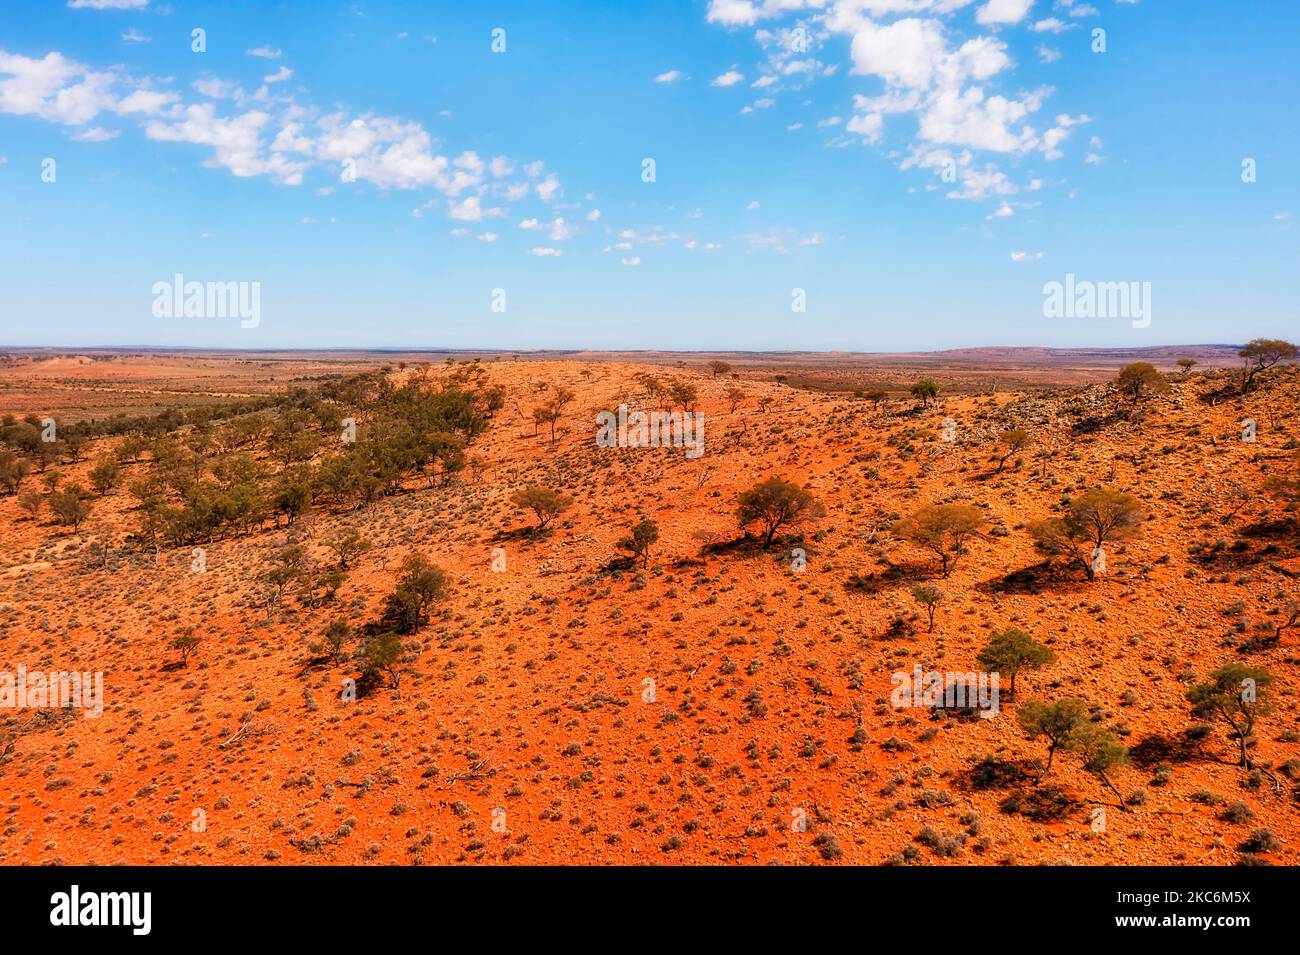 Dolo hill scenic hill range landscape along Barrier Highway if Australia NSW Far west - red soil outback. Stock Photo